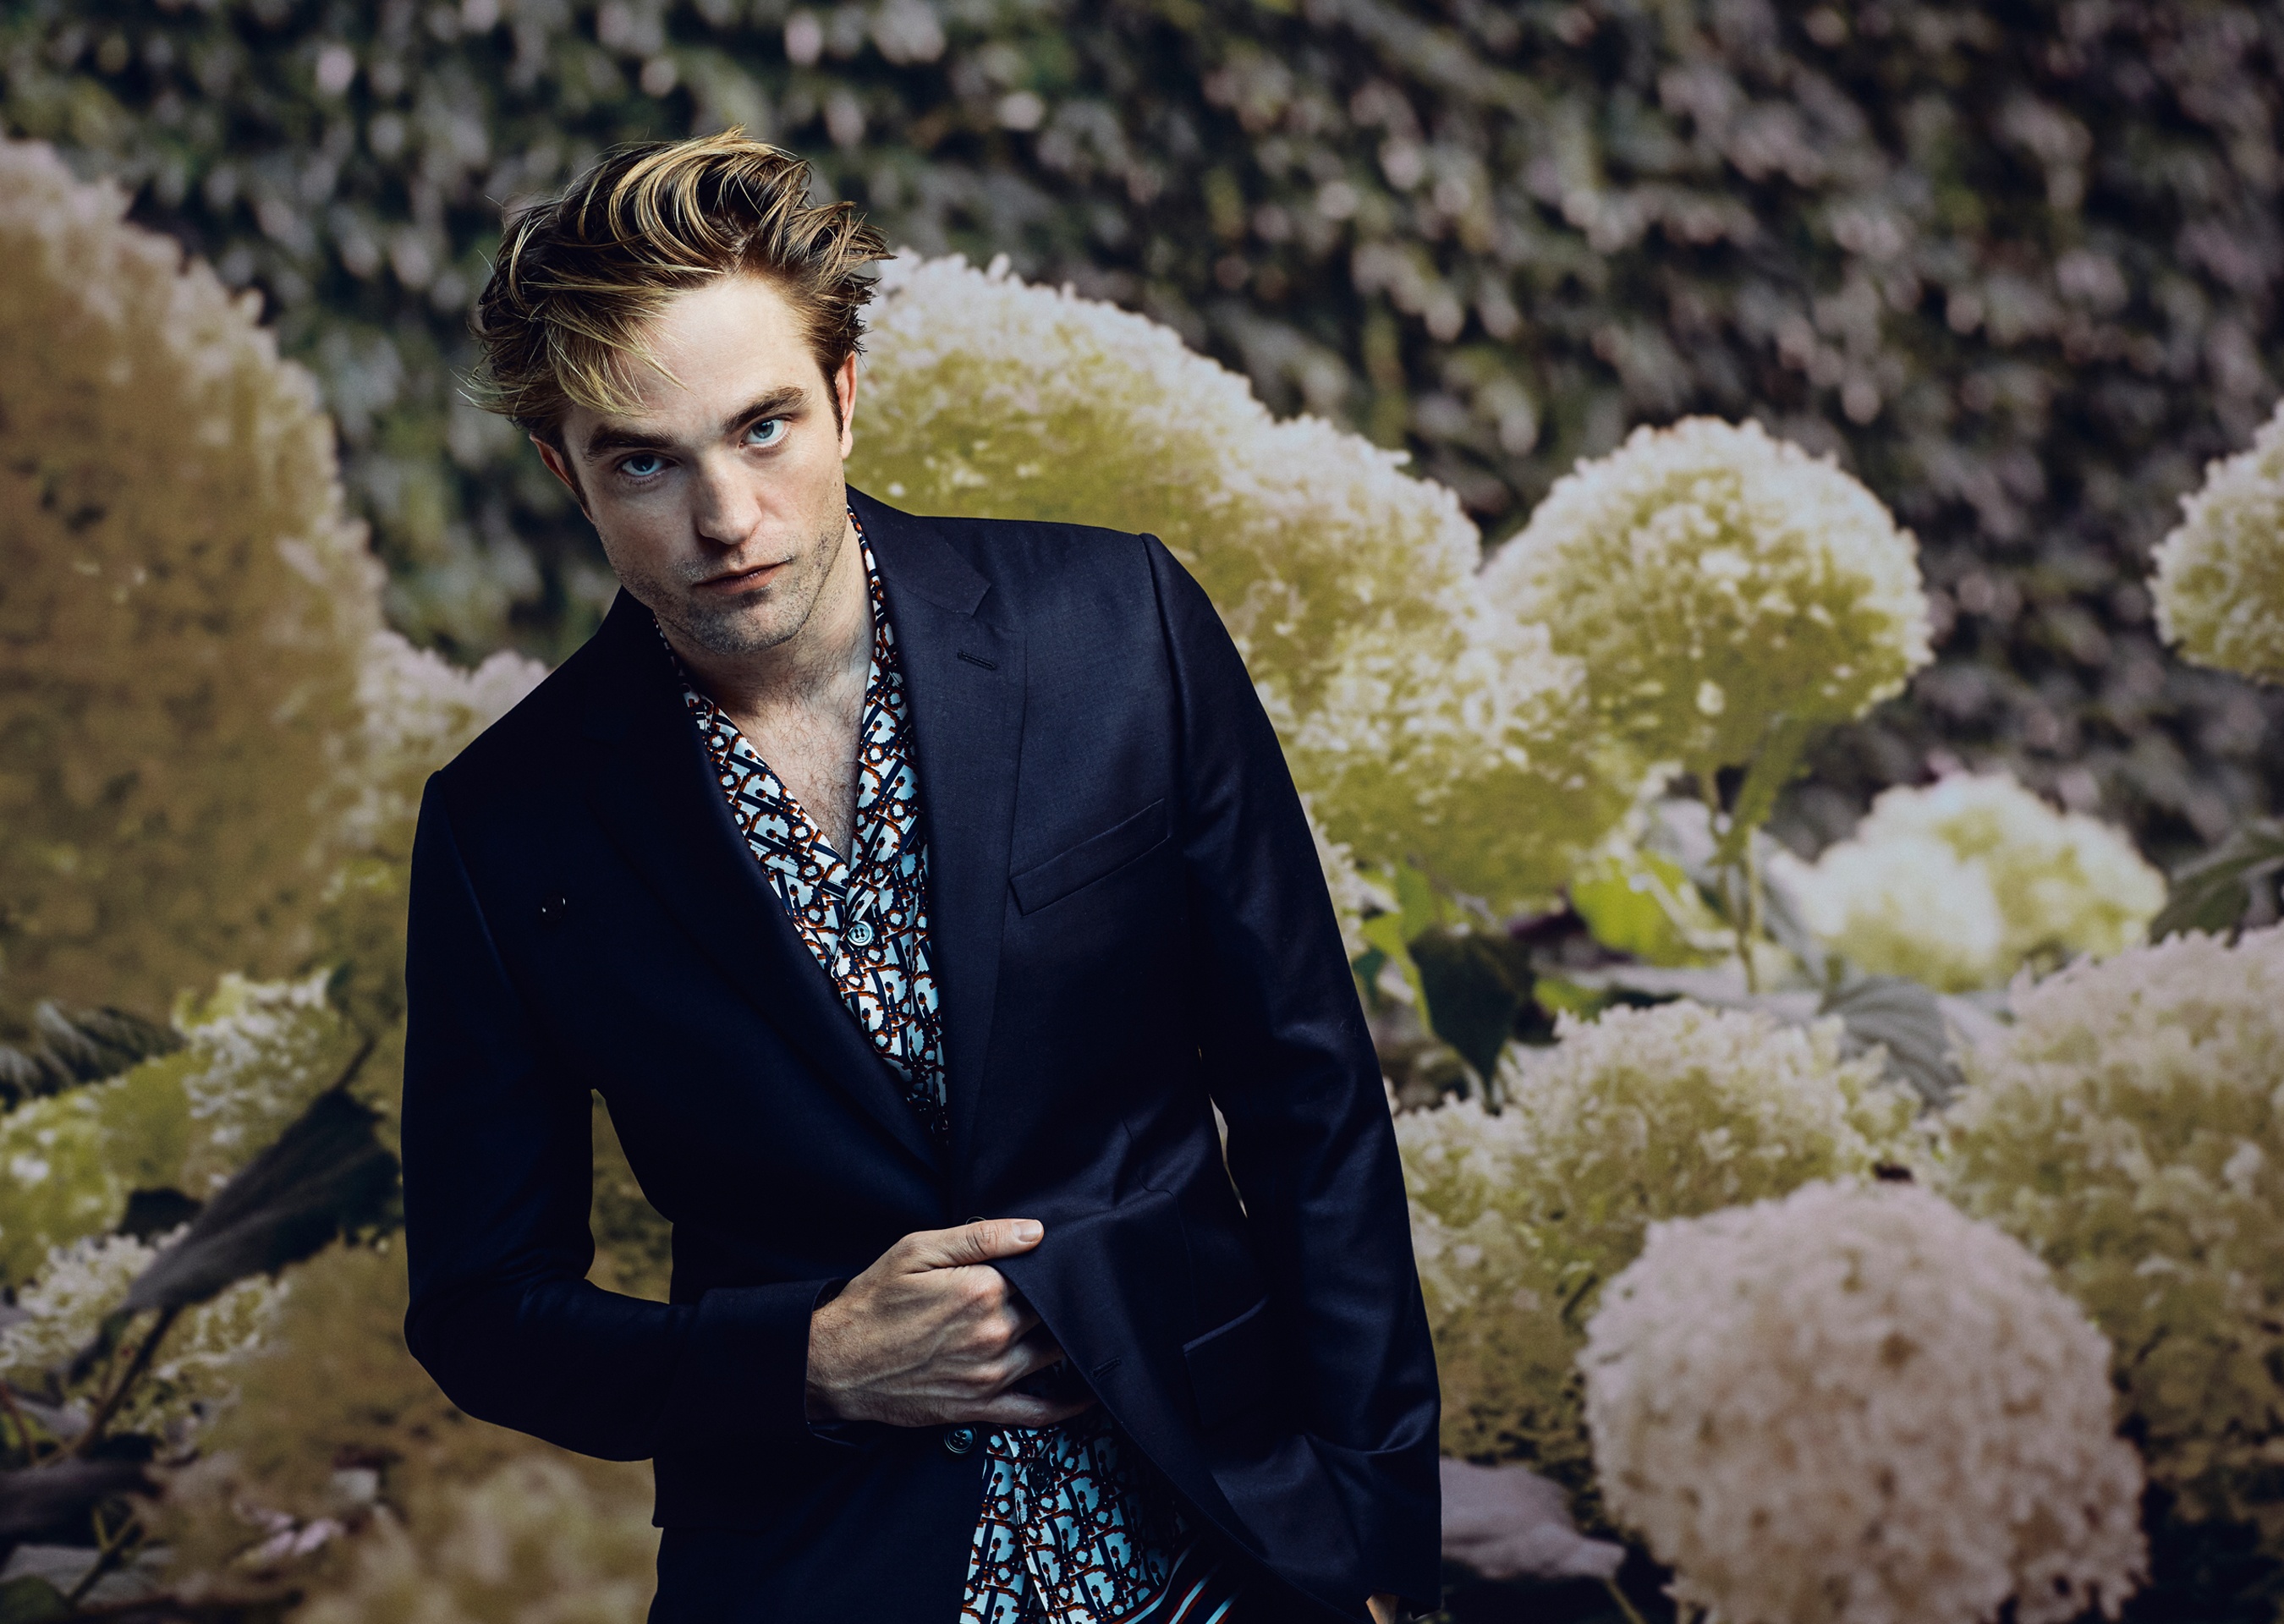 Getting Lost in the Work With Robert Pattinson